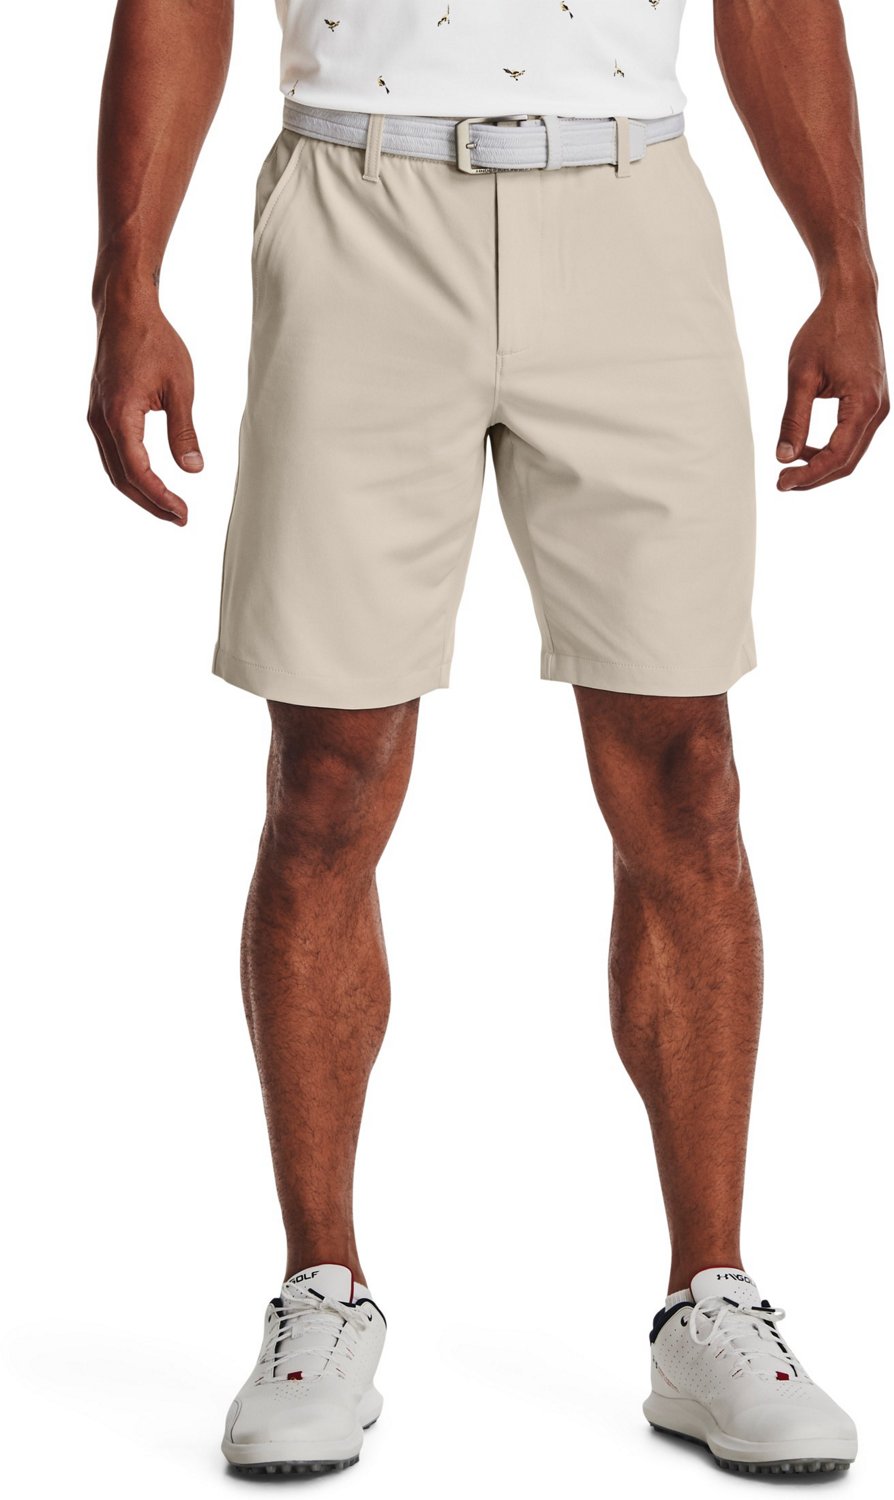 Under Armour Men’s Drive Shorts 10 in | Free Shipping at Academy